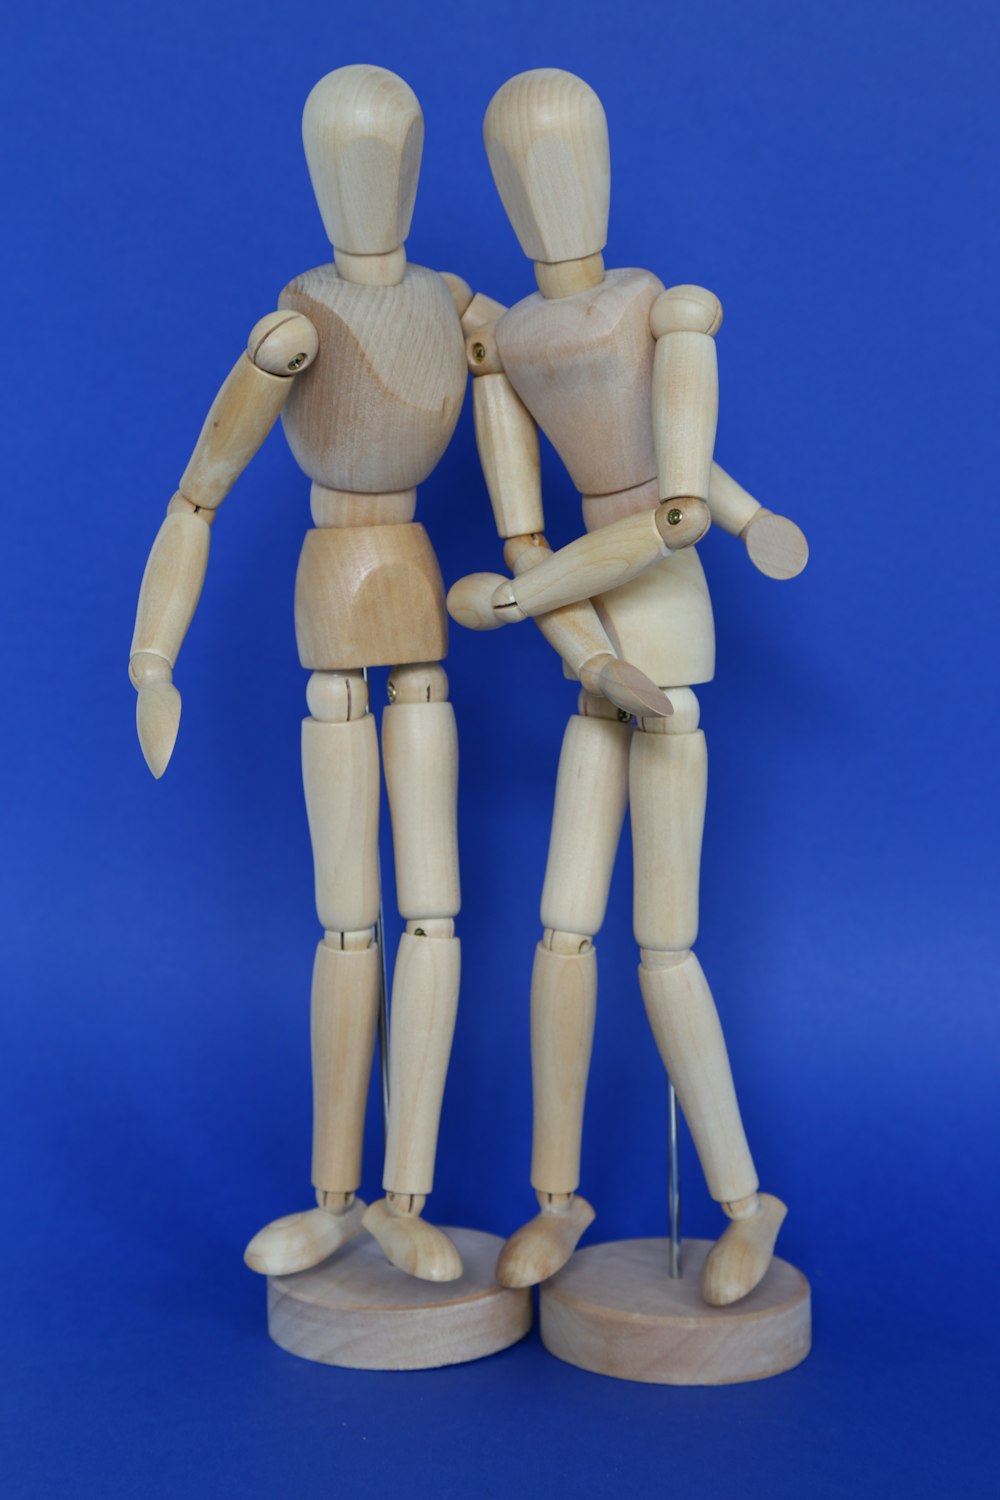 a couple of wooden mannequins standing next to each other